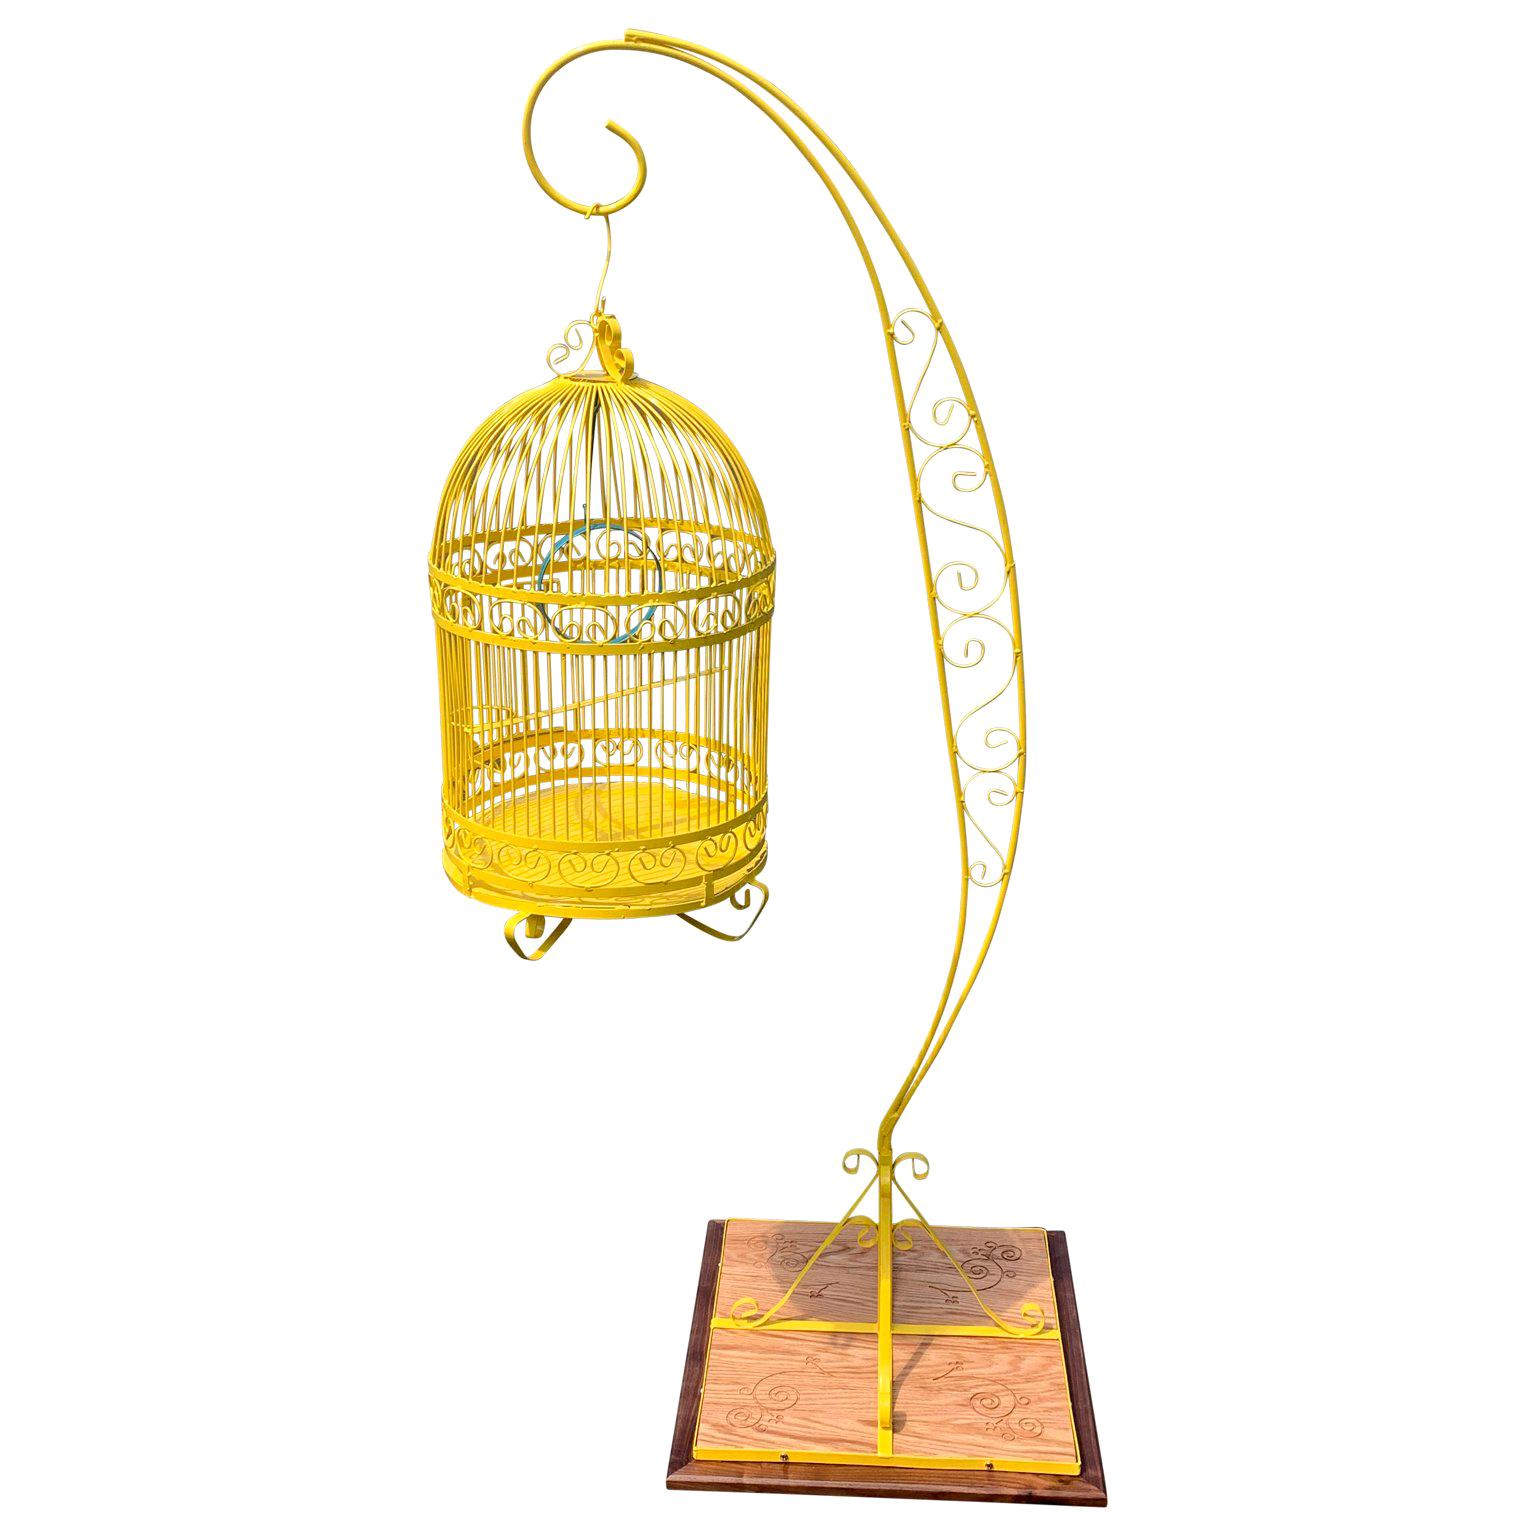 Vintage Metal Birdcage On Stand, Newly Powder-Coated In Bright Sunshine Yellow